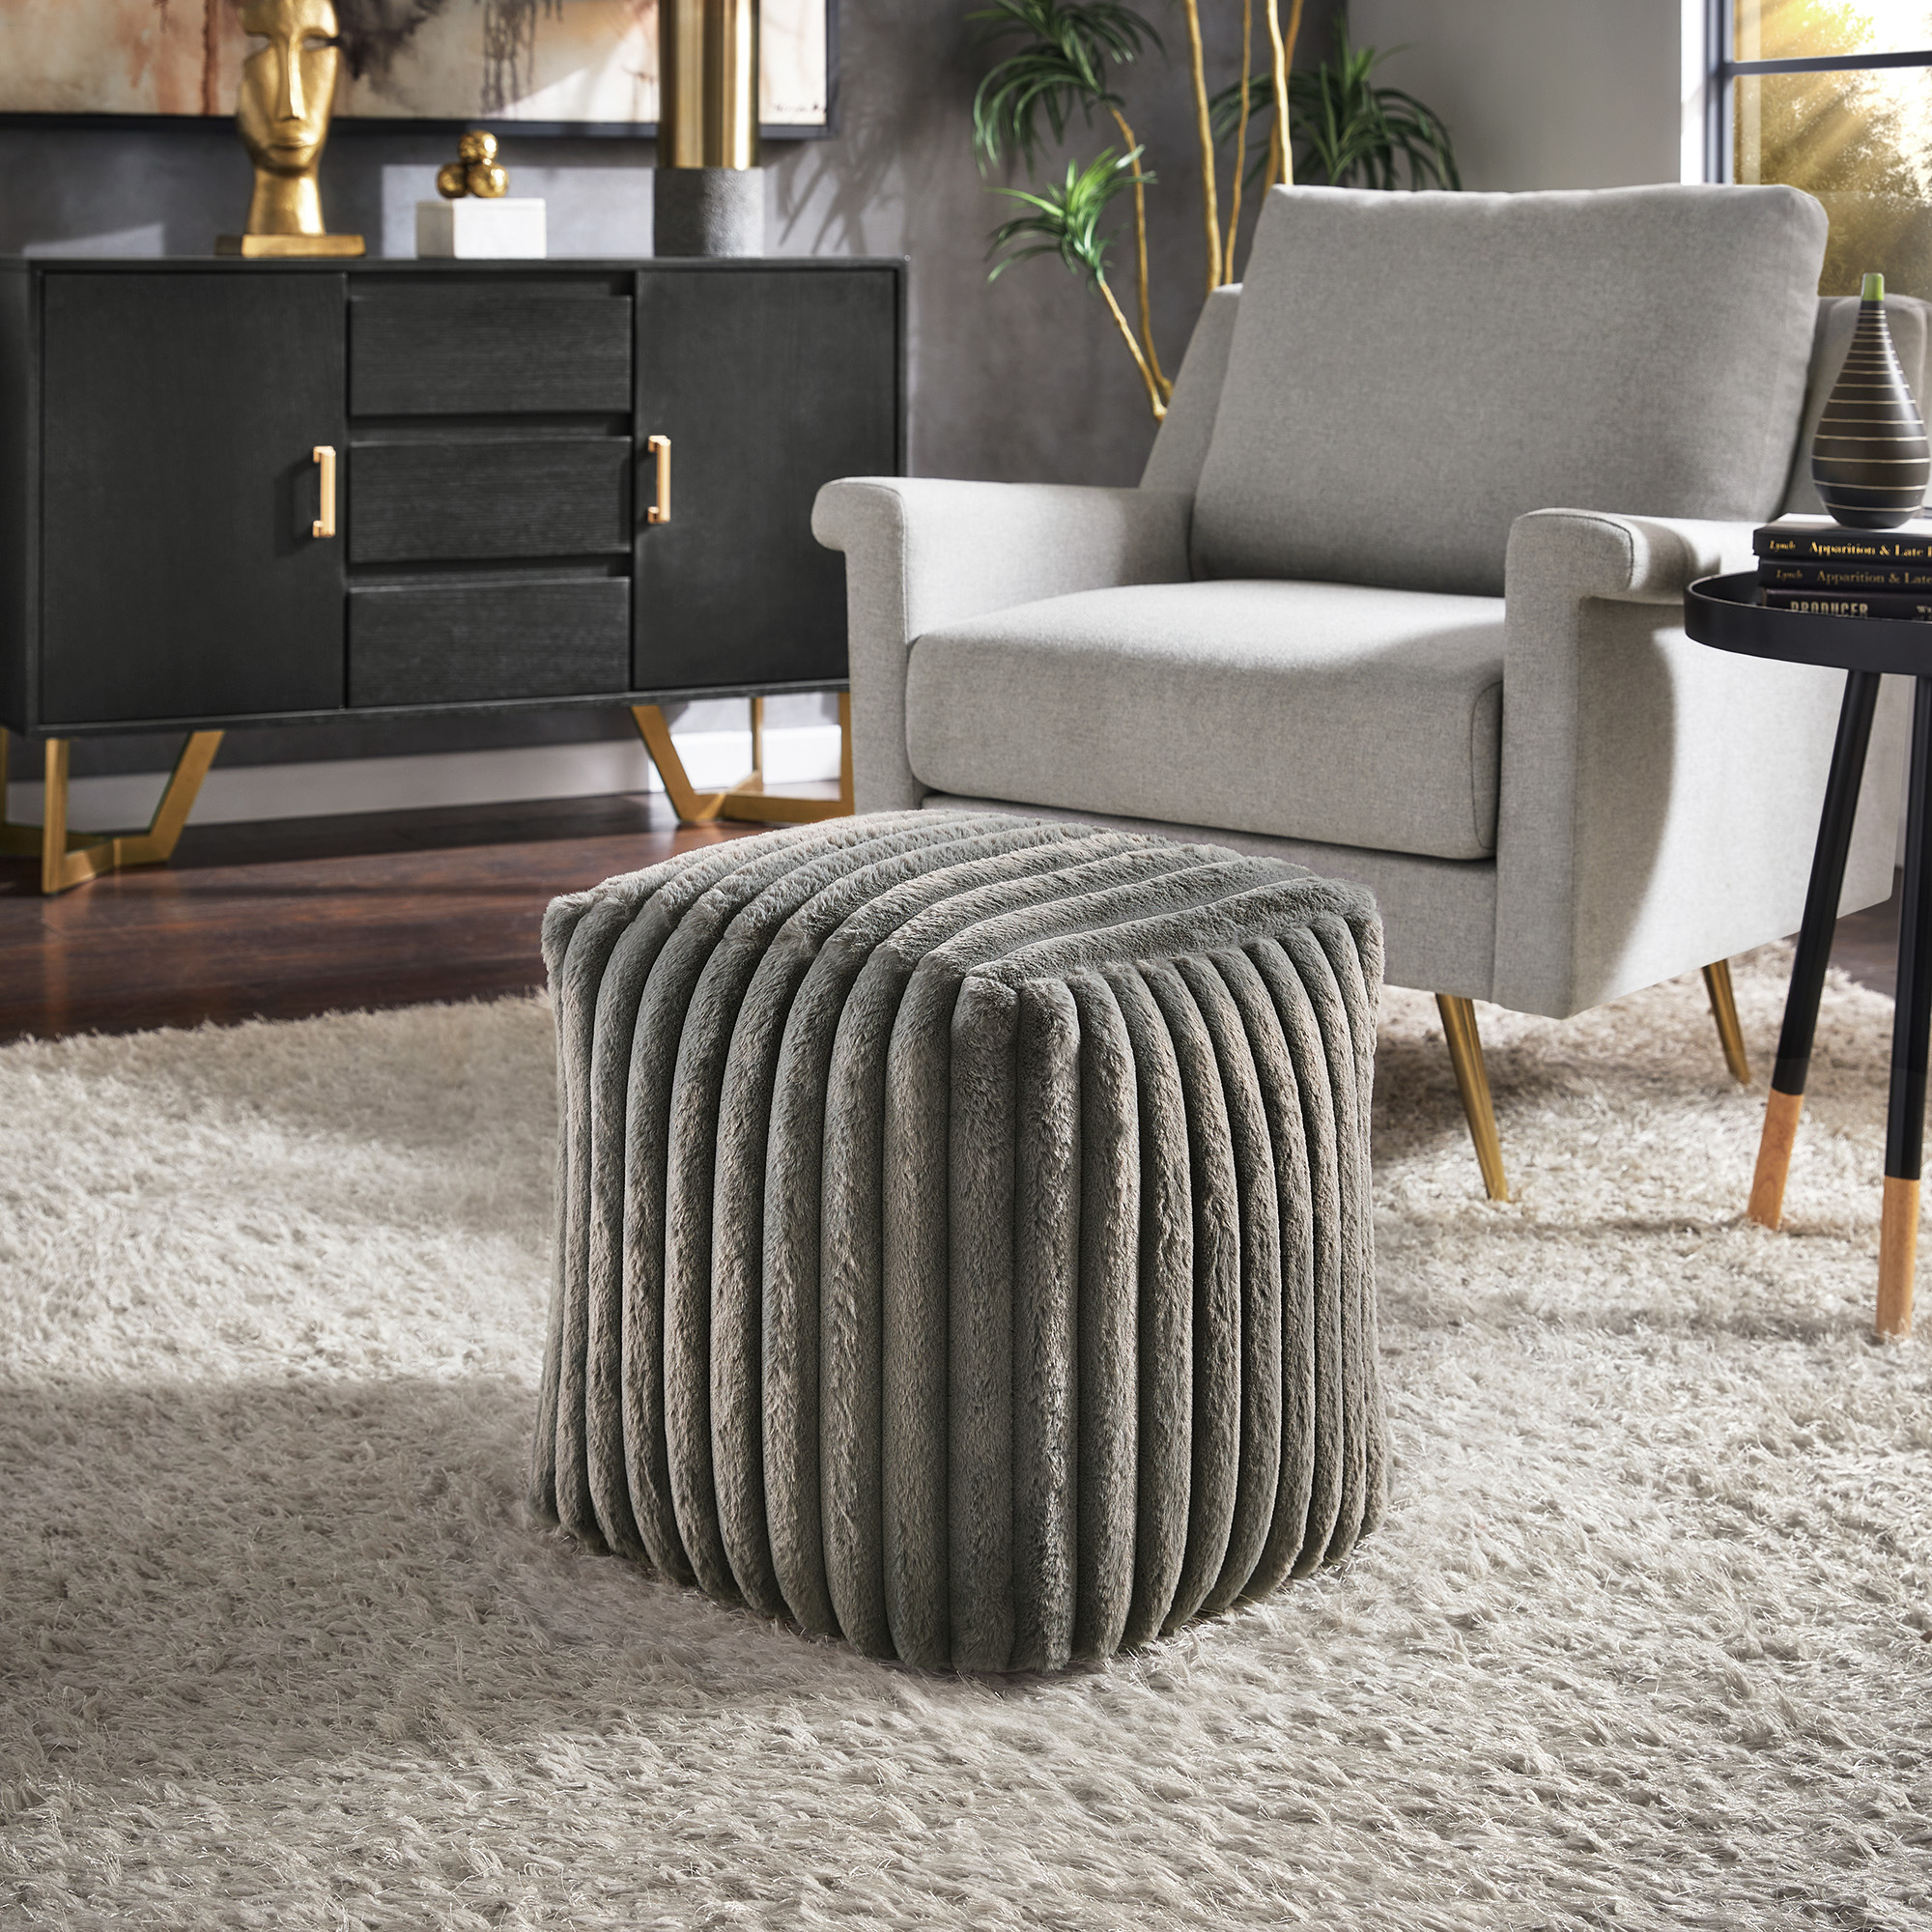 Upholstered Square Pouf Ottoman